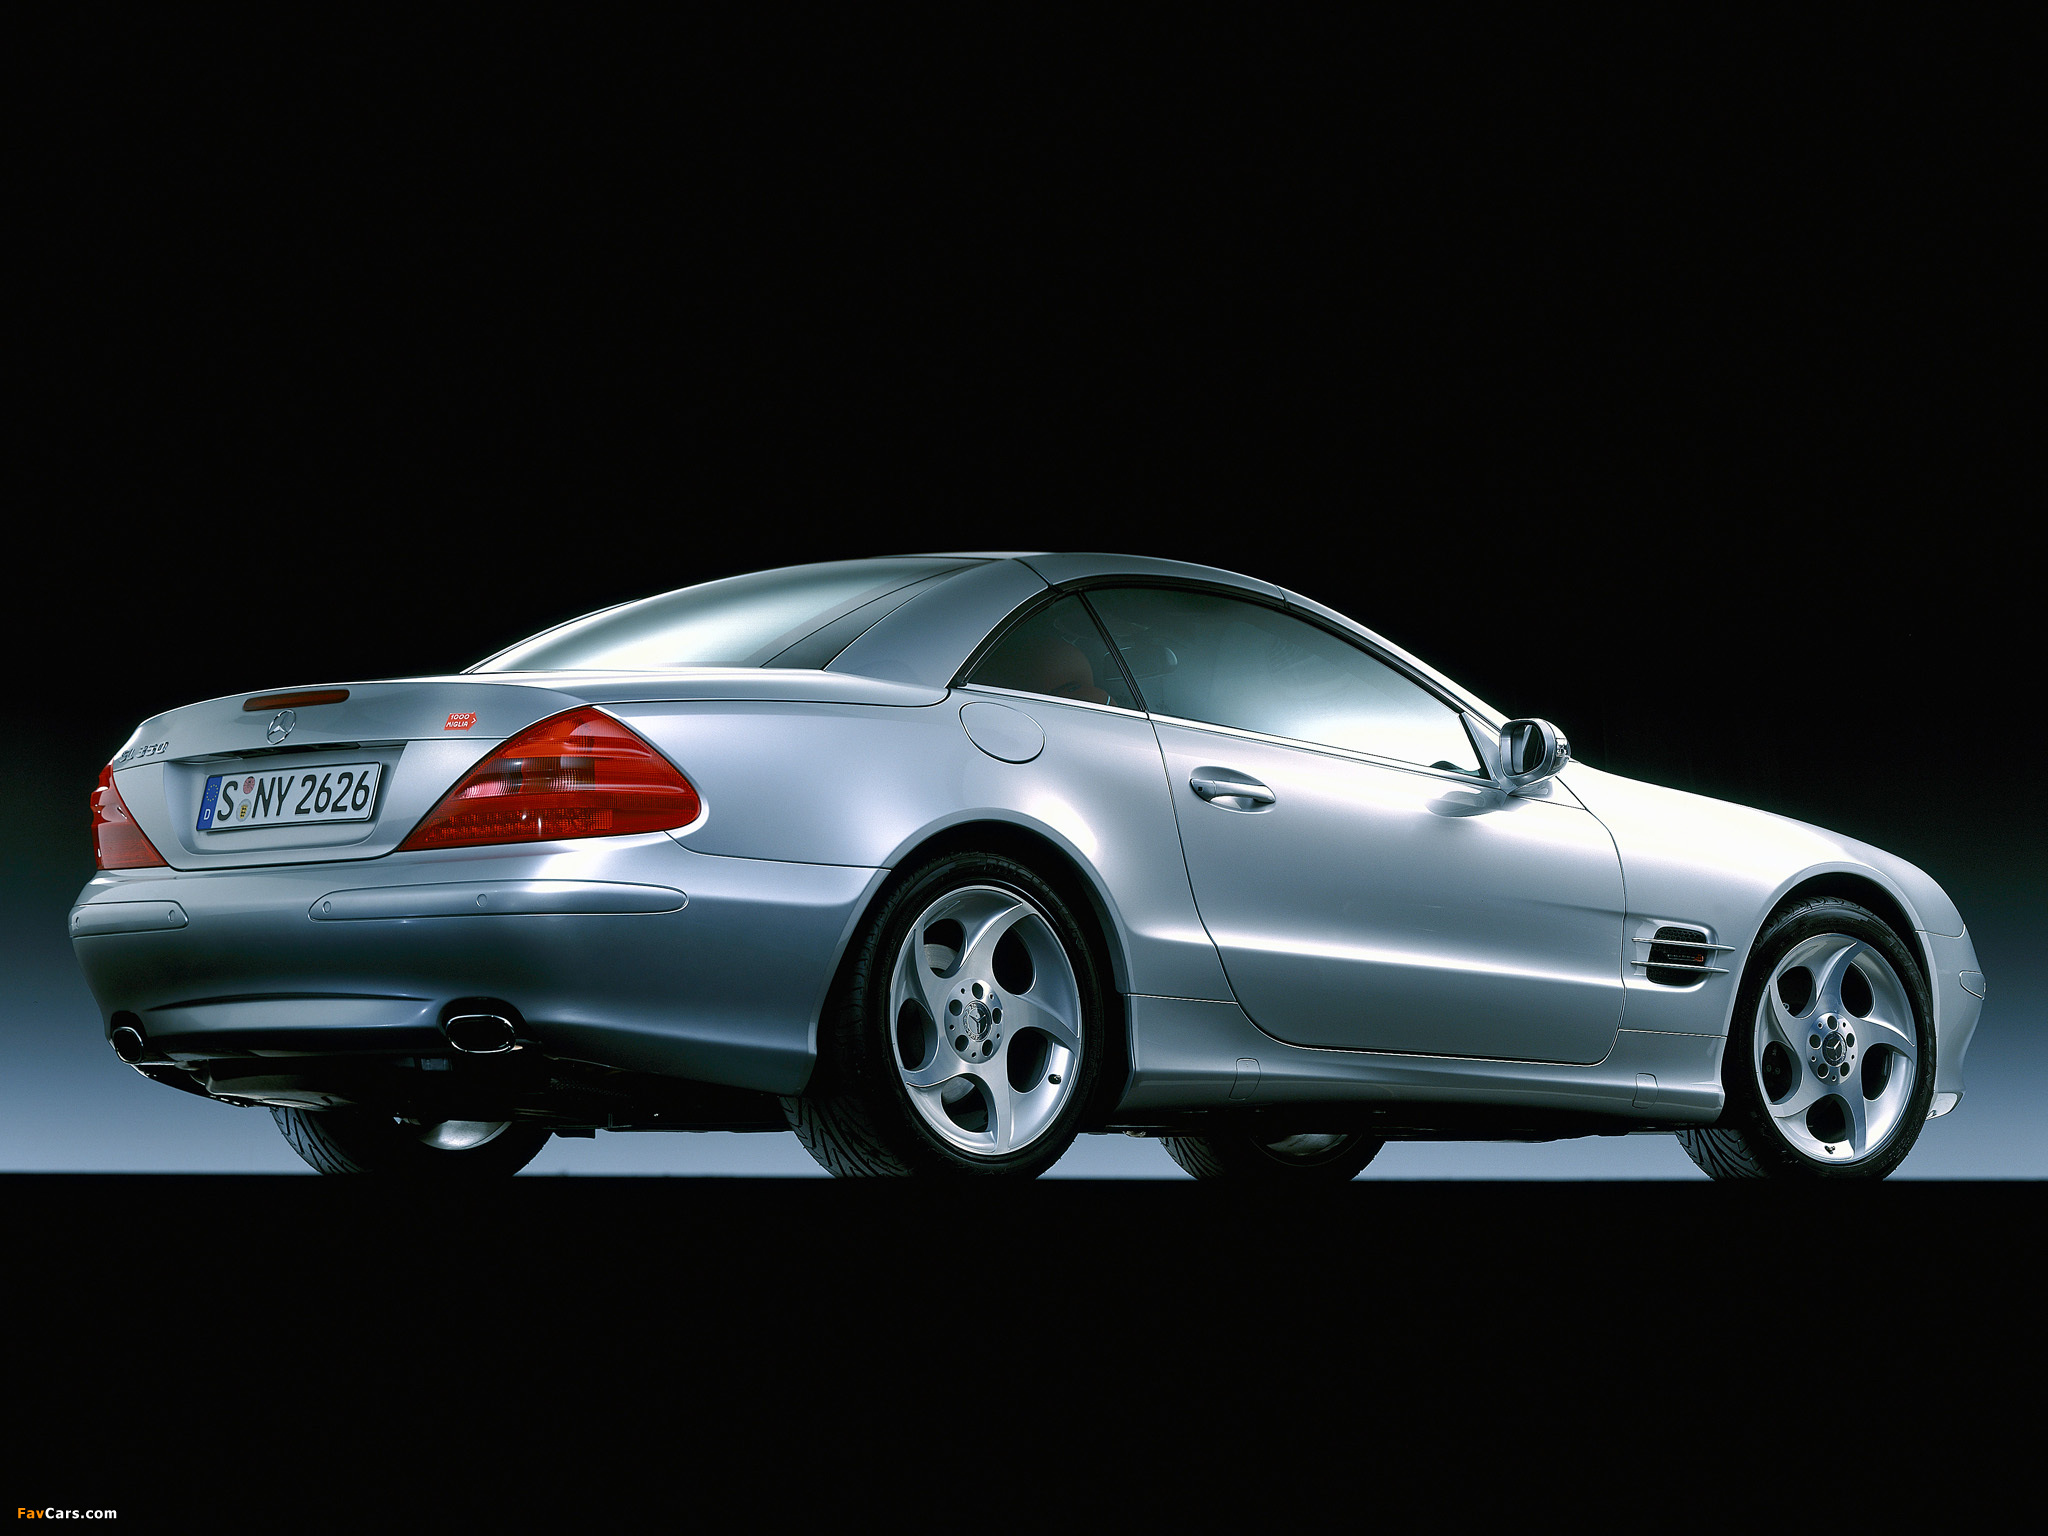 Wallpapers of Mercedes Benz SL 350 Mille Miglia Edition